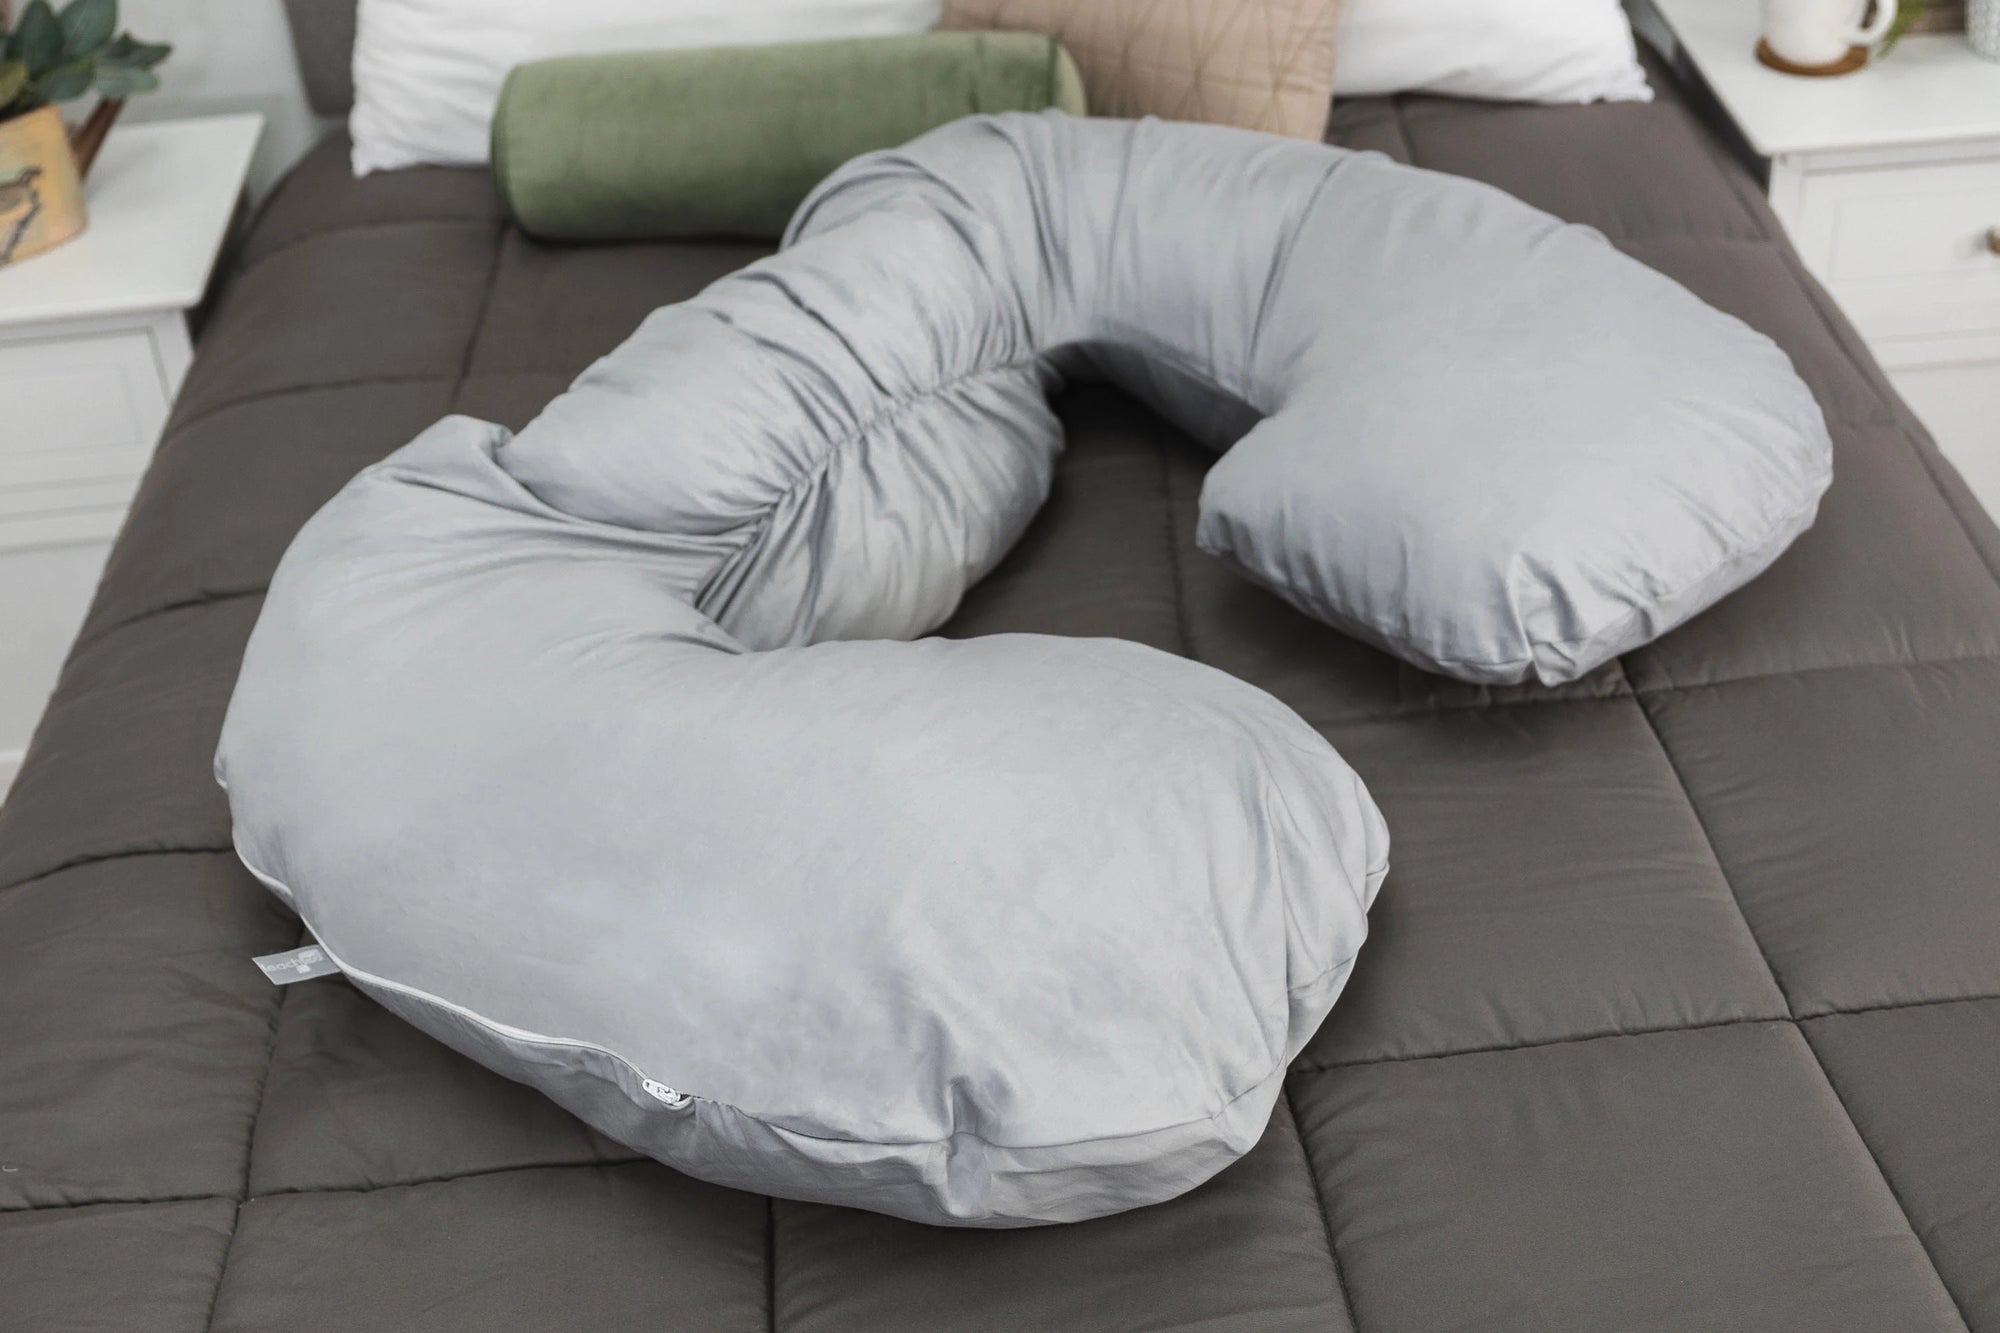 Grpw To Sleep Supreme Product Only in Peaceful Gray